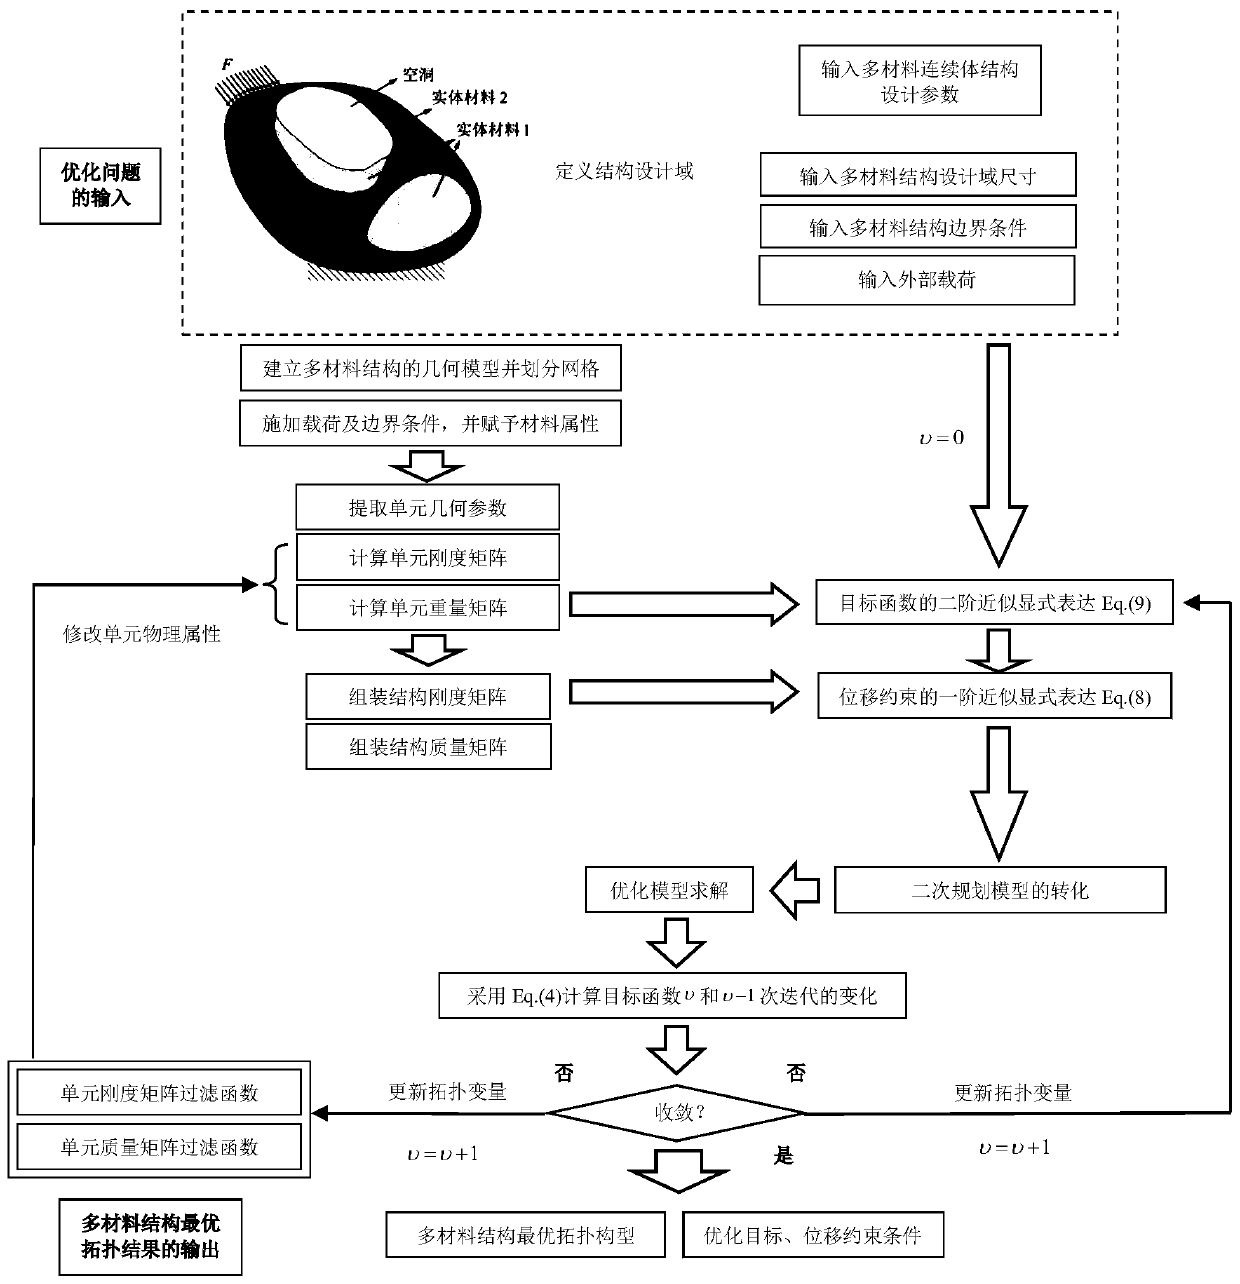 A multi-material continuum structure topology optimization design method based on an independent continuous mapping method